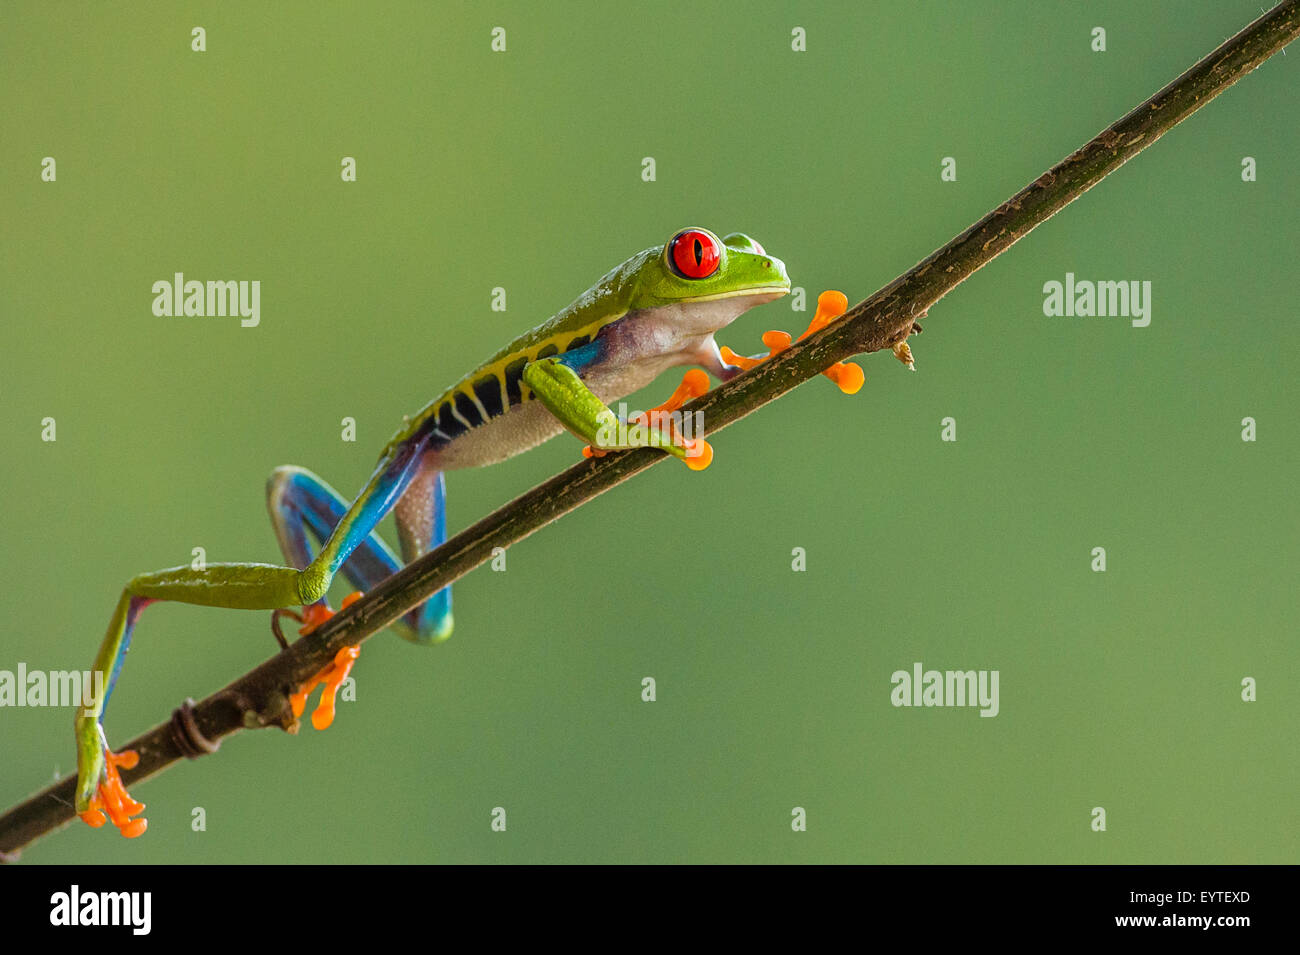 A Red-eyed Tree Frog climbing a stick Stock Photo